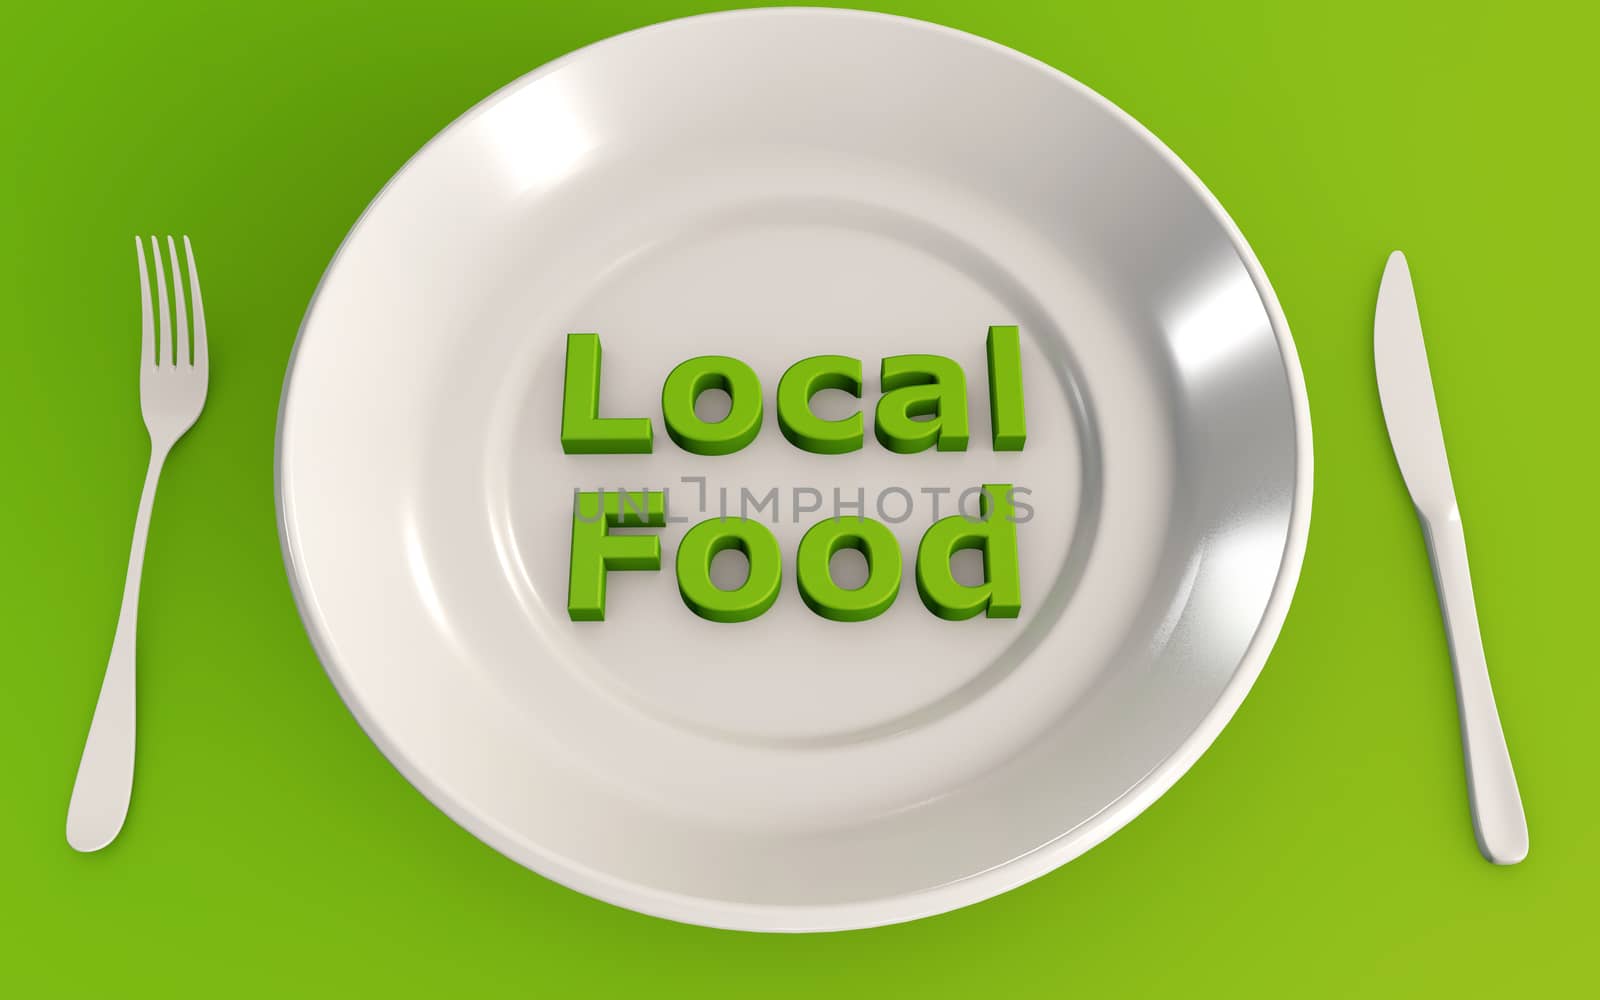 Local Food concept on a plate 3d rendering by F1b0nacci